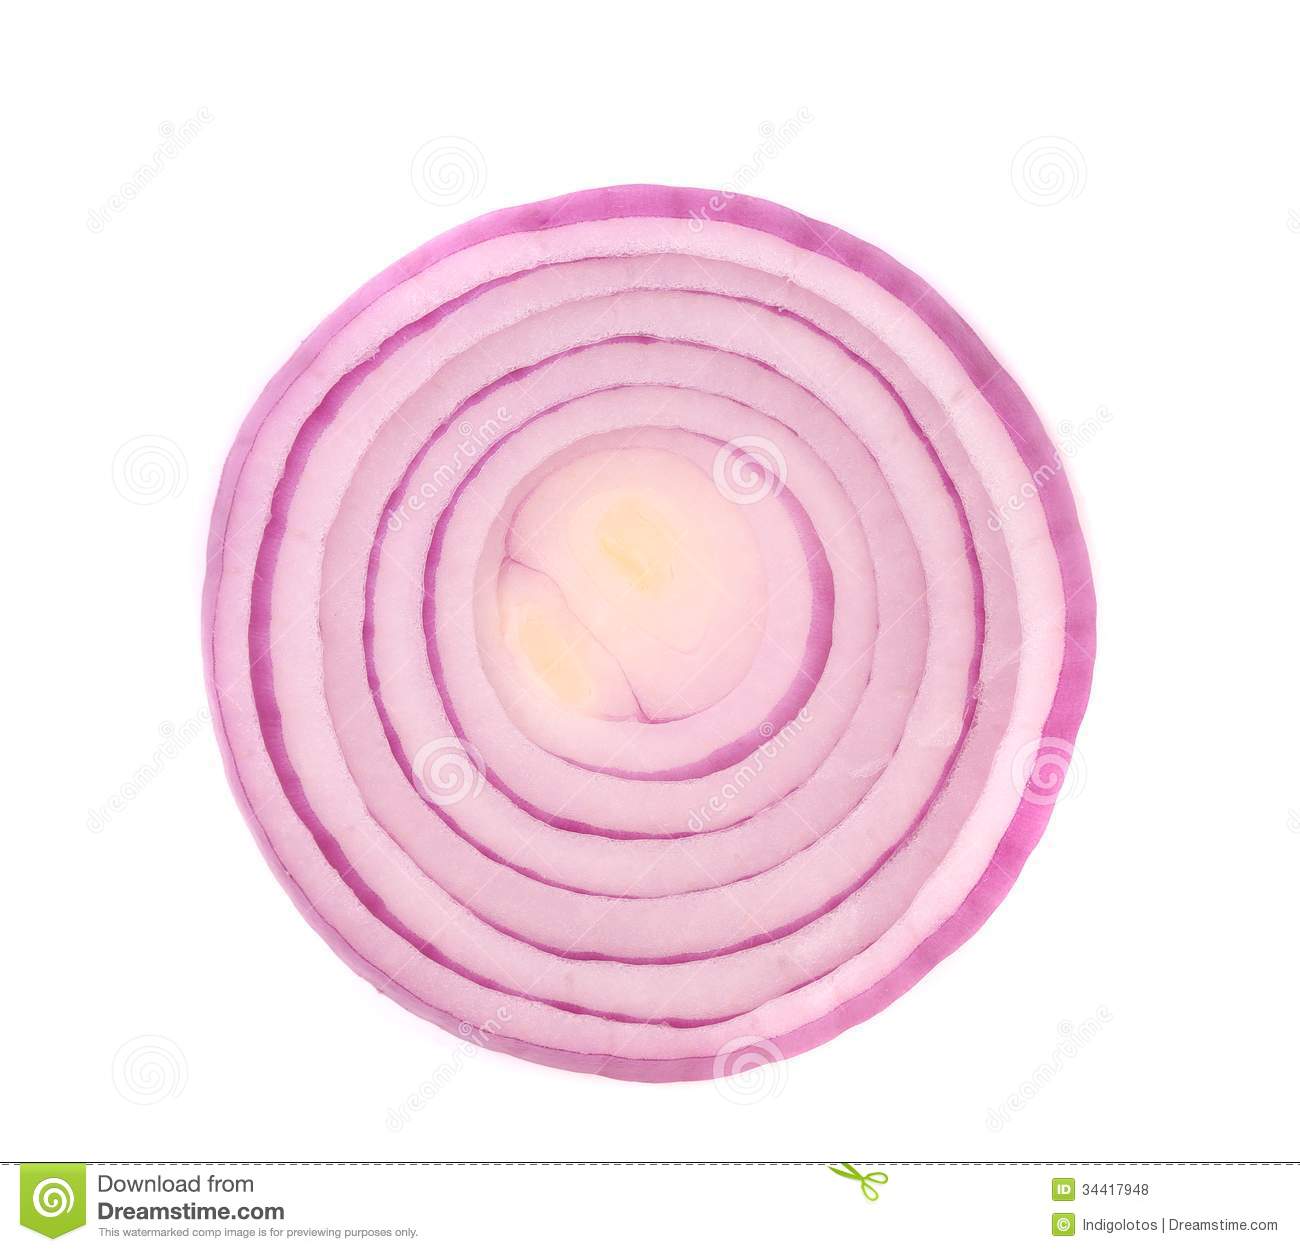 Sliced Red Onion On White Background Royalty Free Stock Photos   Image